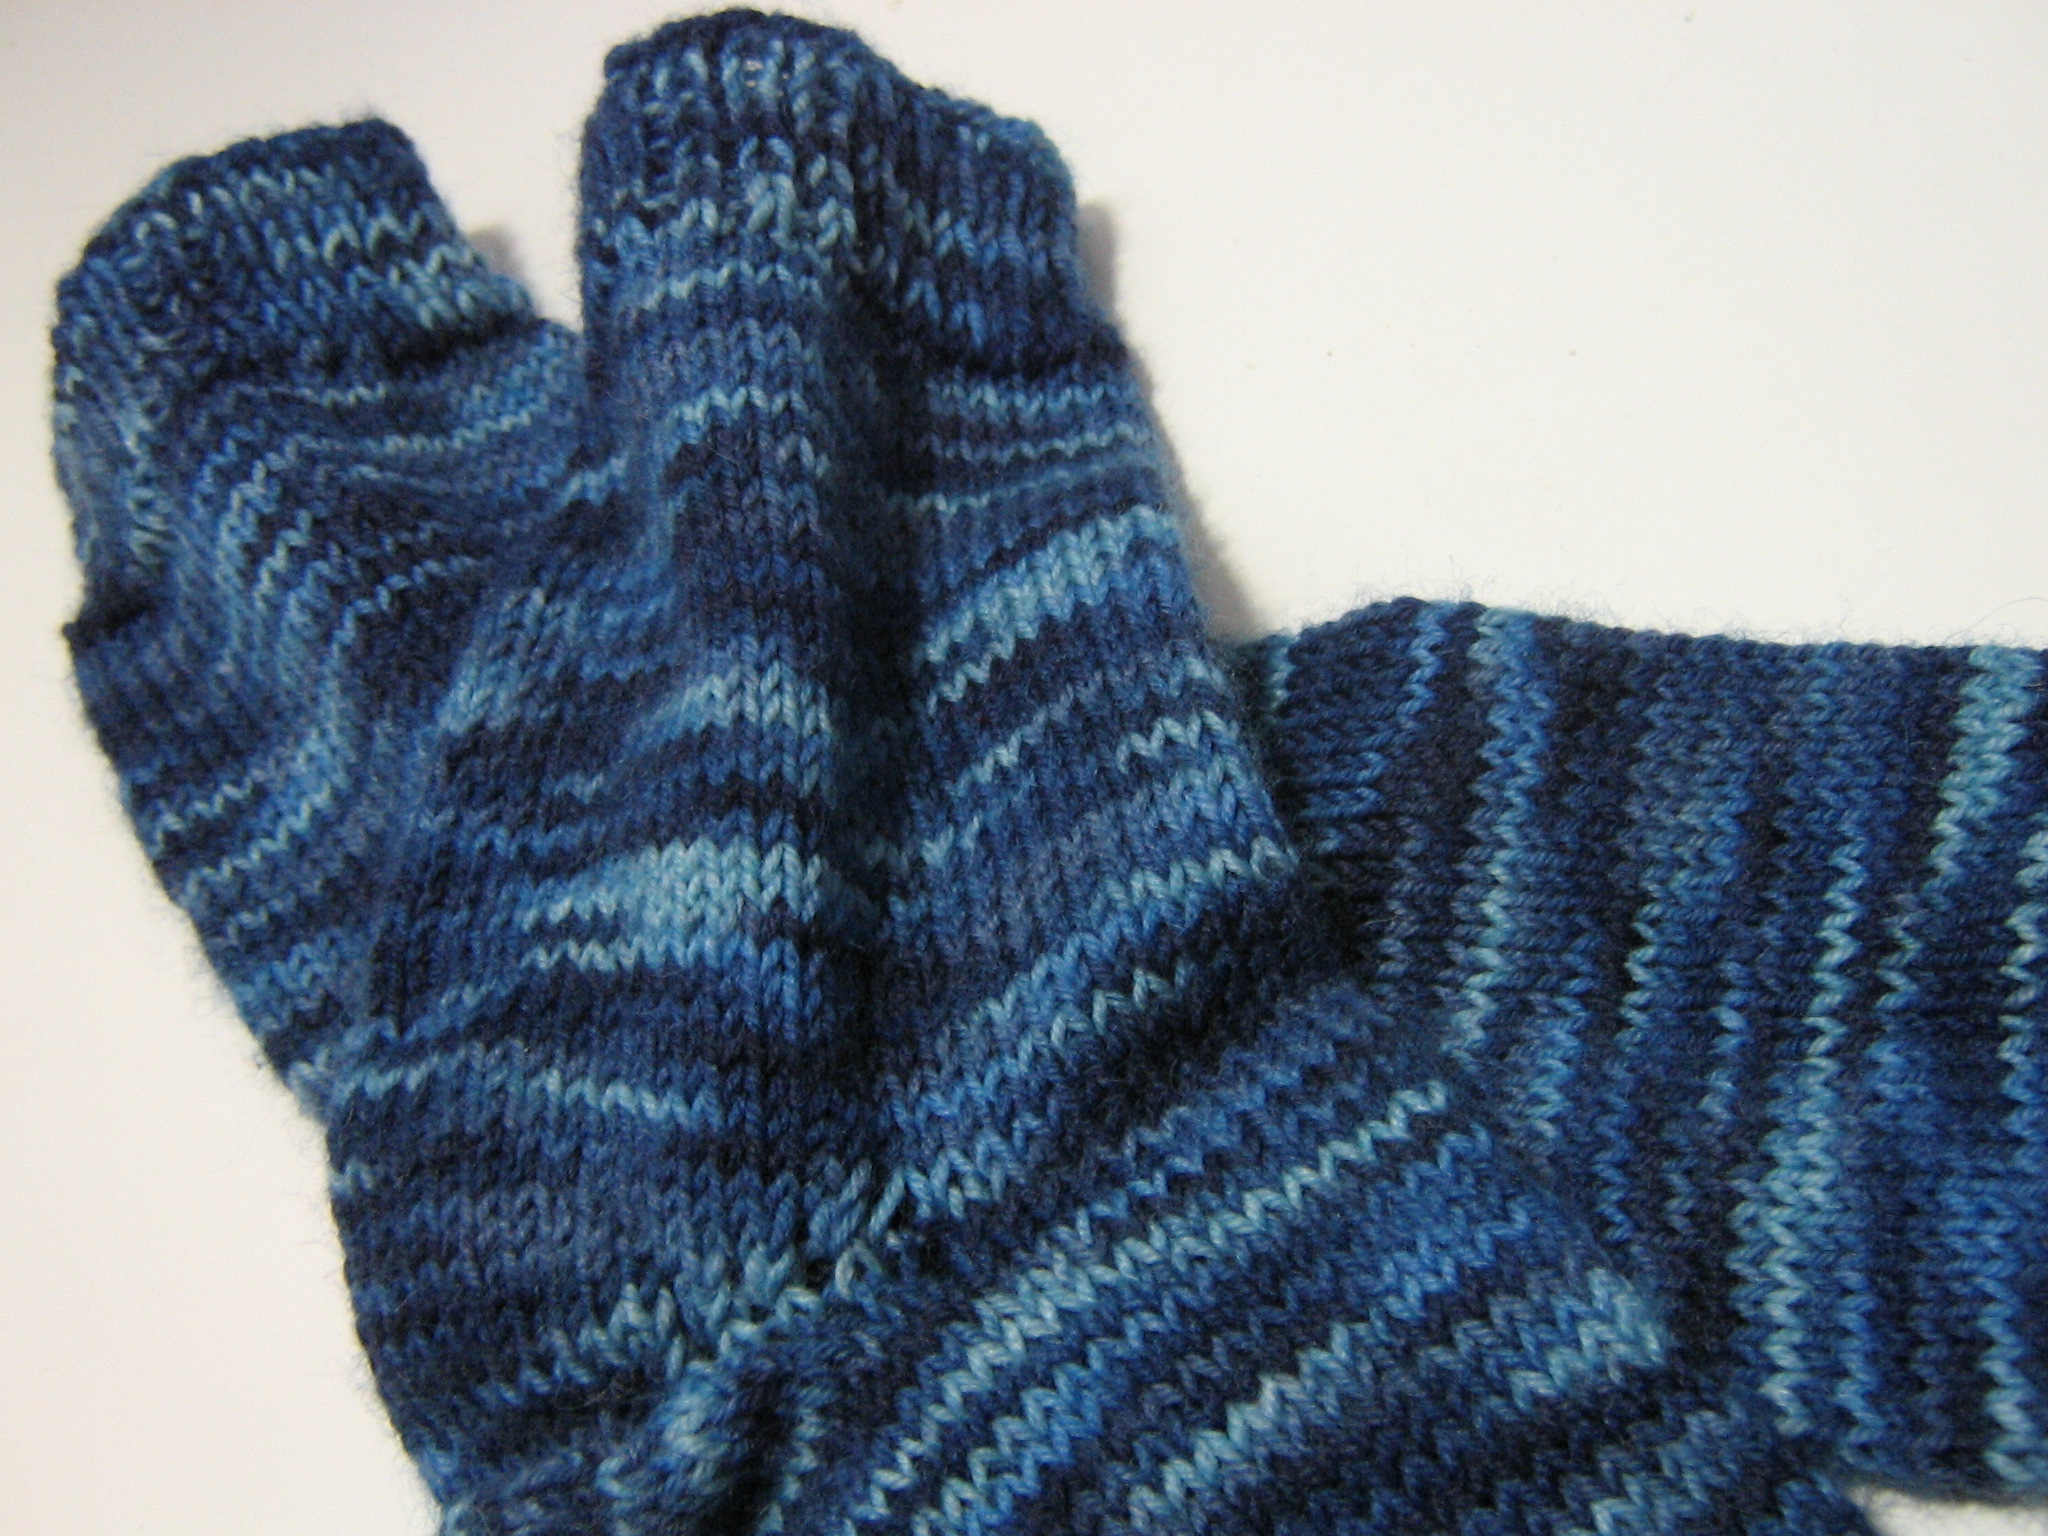 a pair of blue mittens laying on top of a white surface